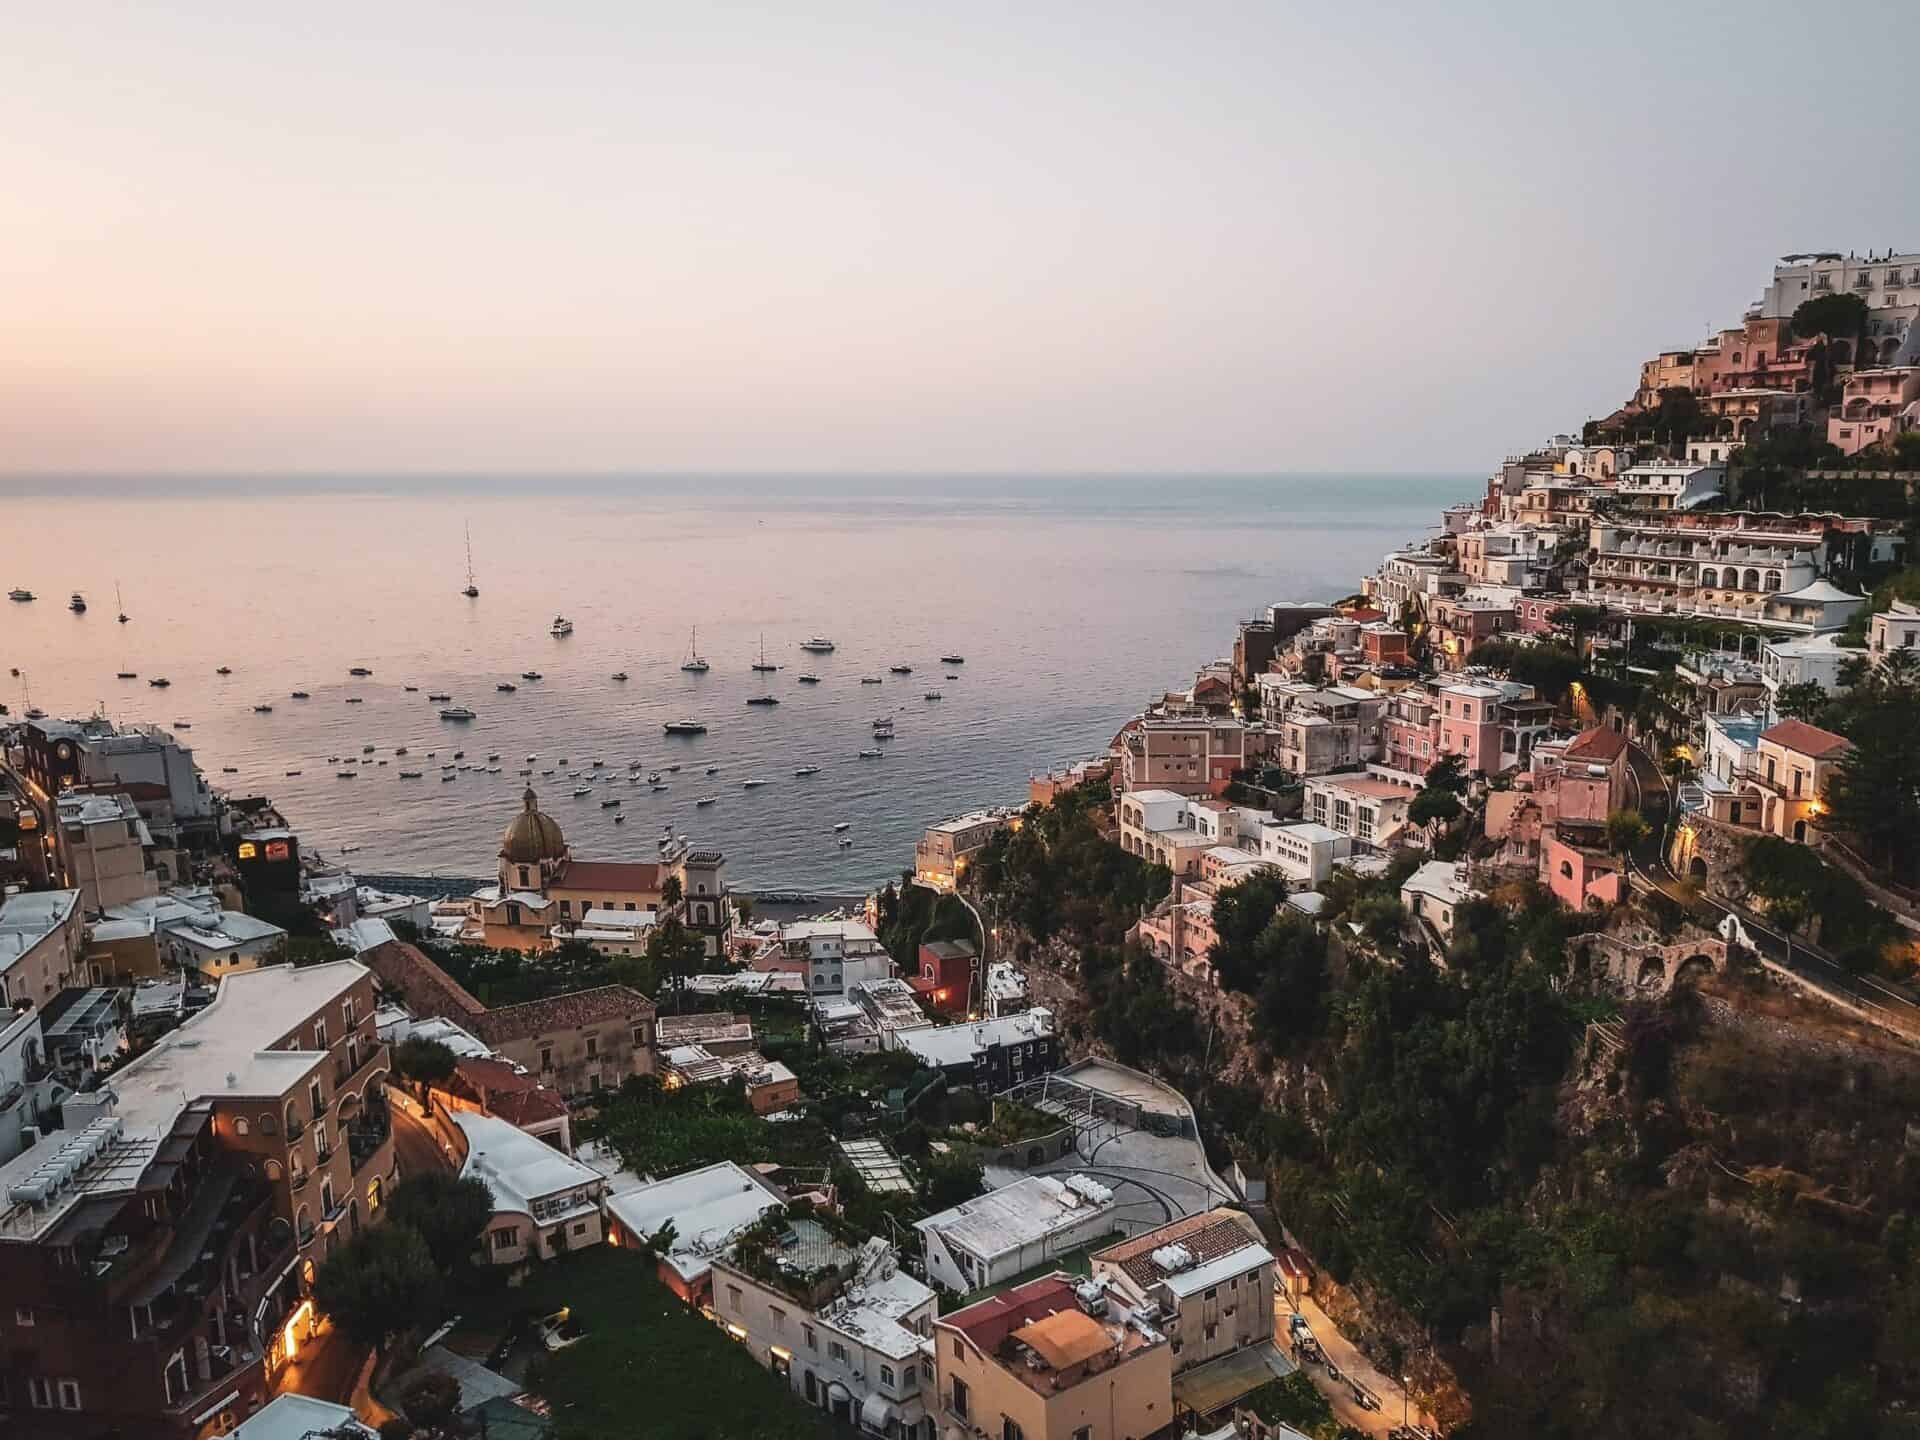 Buildings on cliff in the Amalfi Coast overlooking the Mediterranean sea at dusk